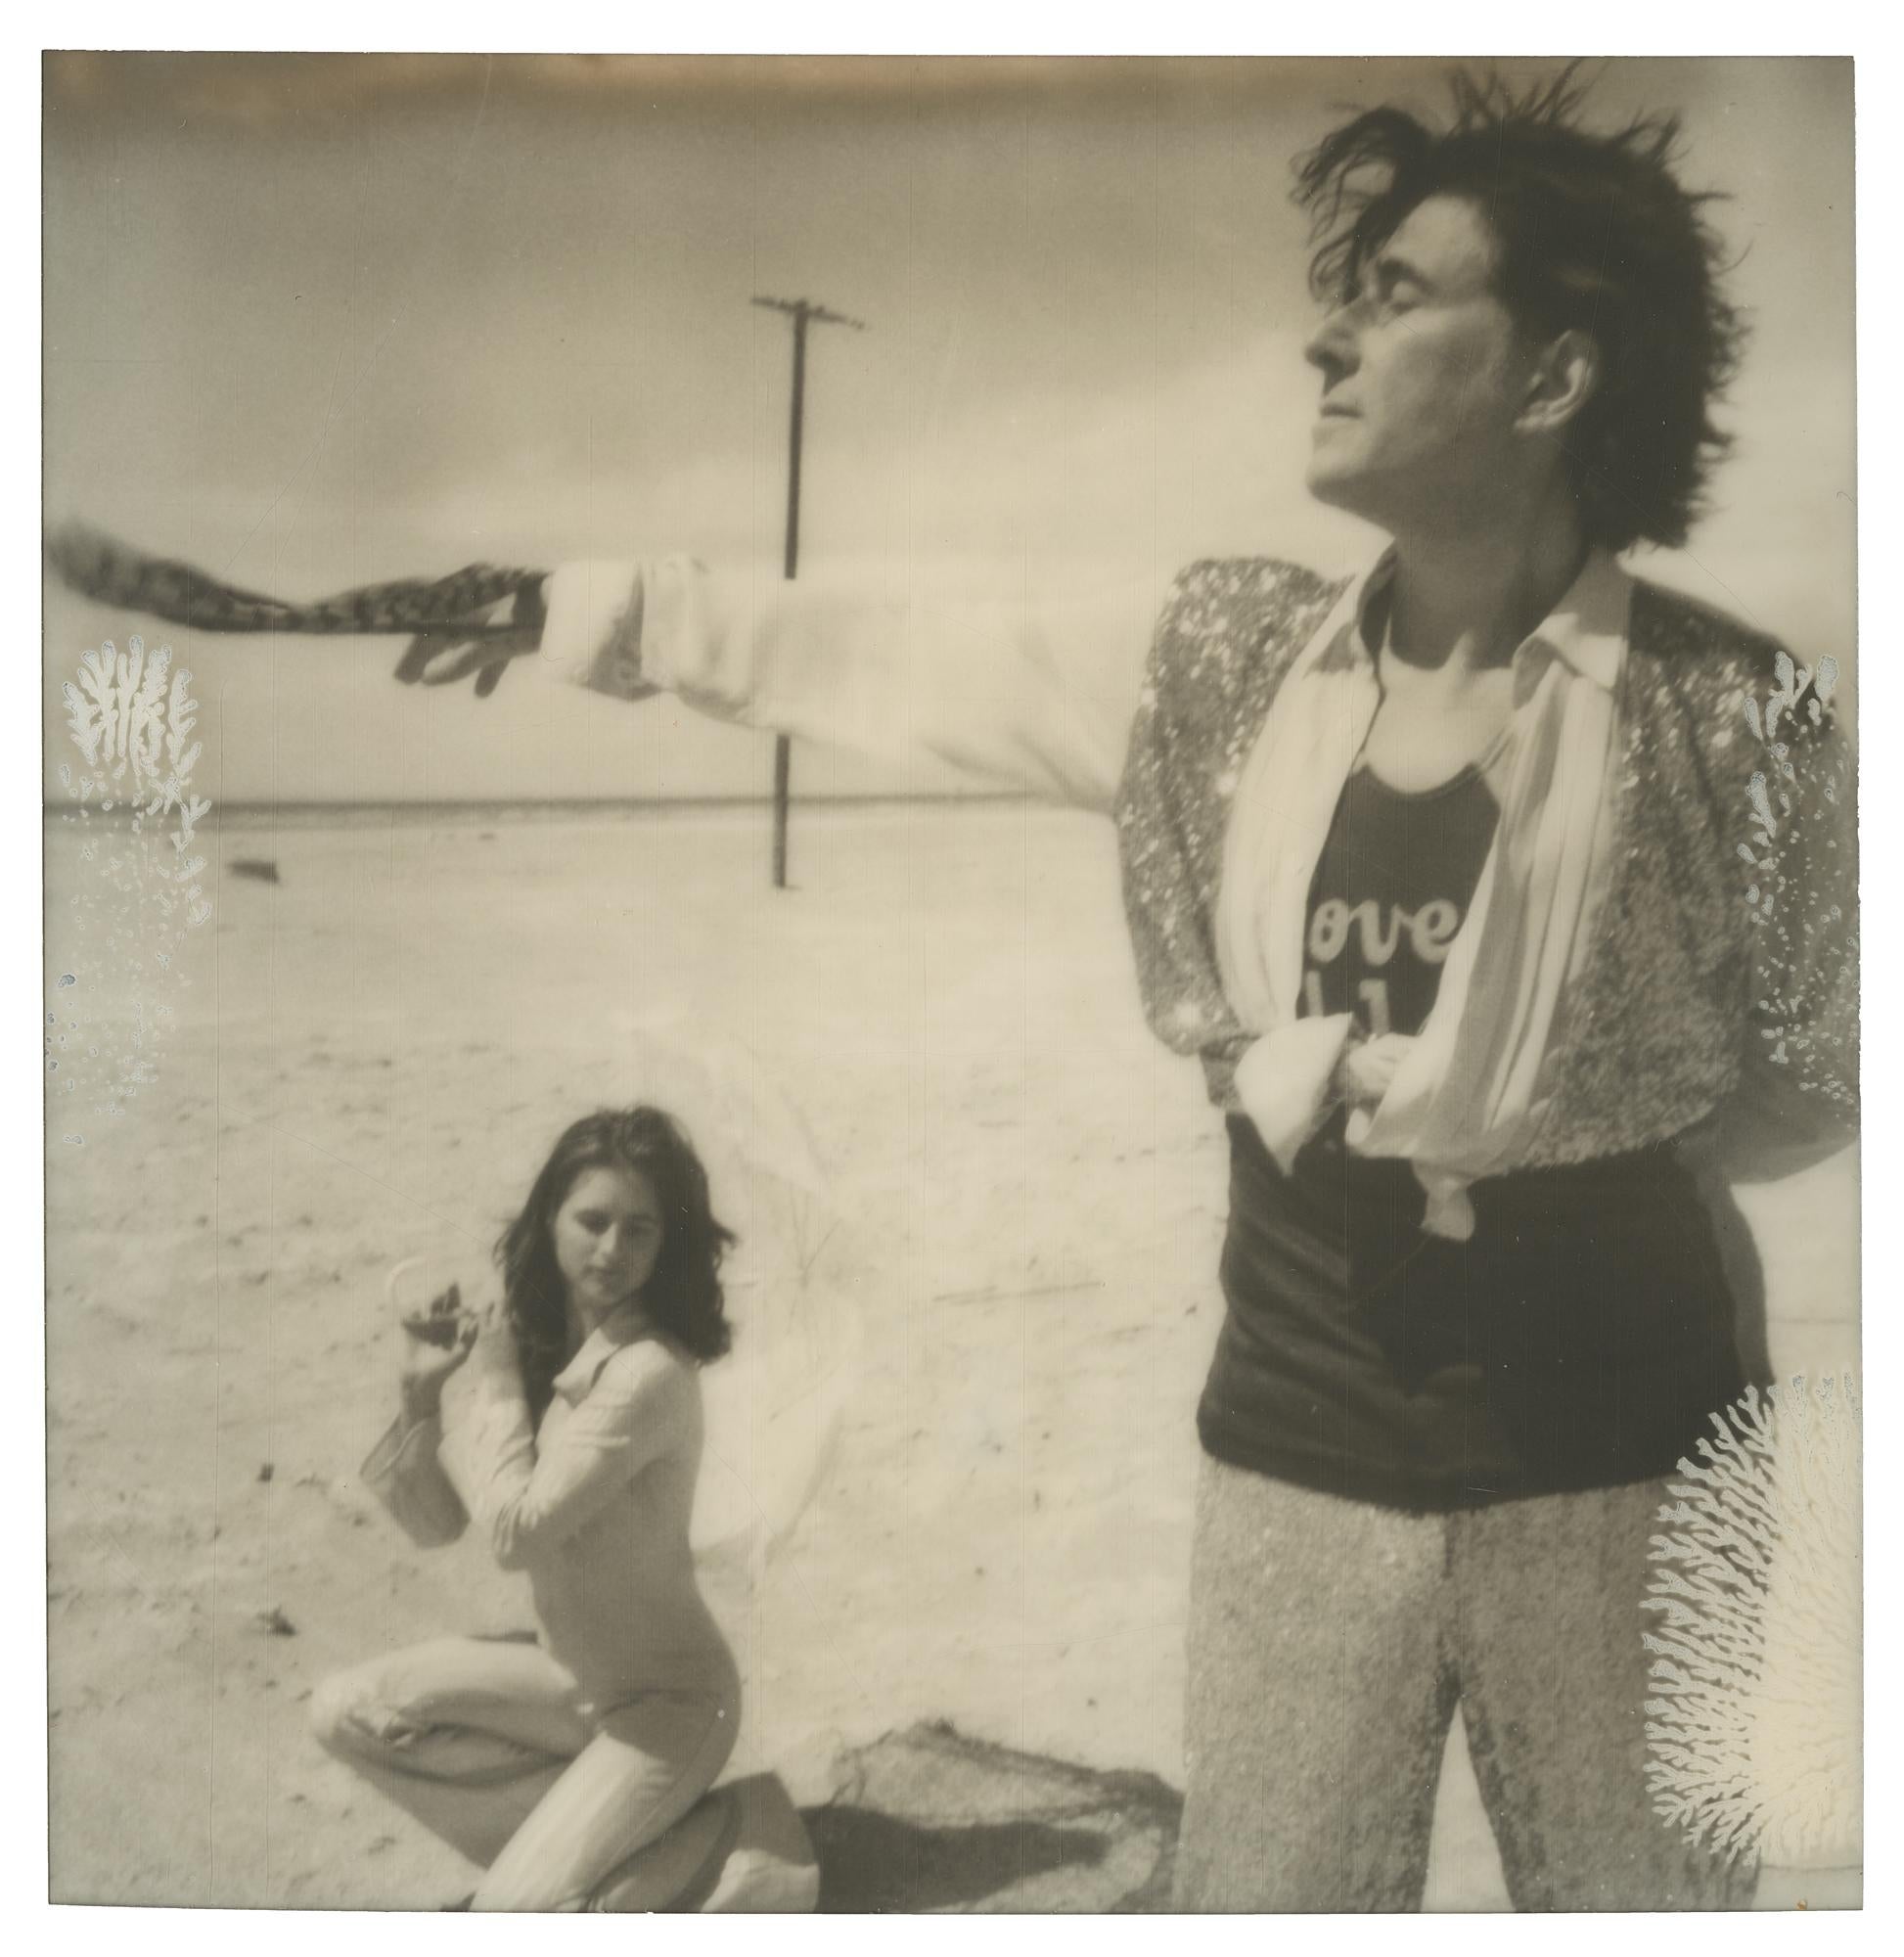 Stefanie Schneider Black and White Photograph - No End (Ensign Broderick record Shoot 'Blood Crush') 